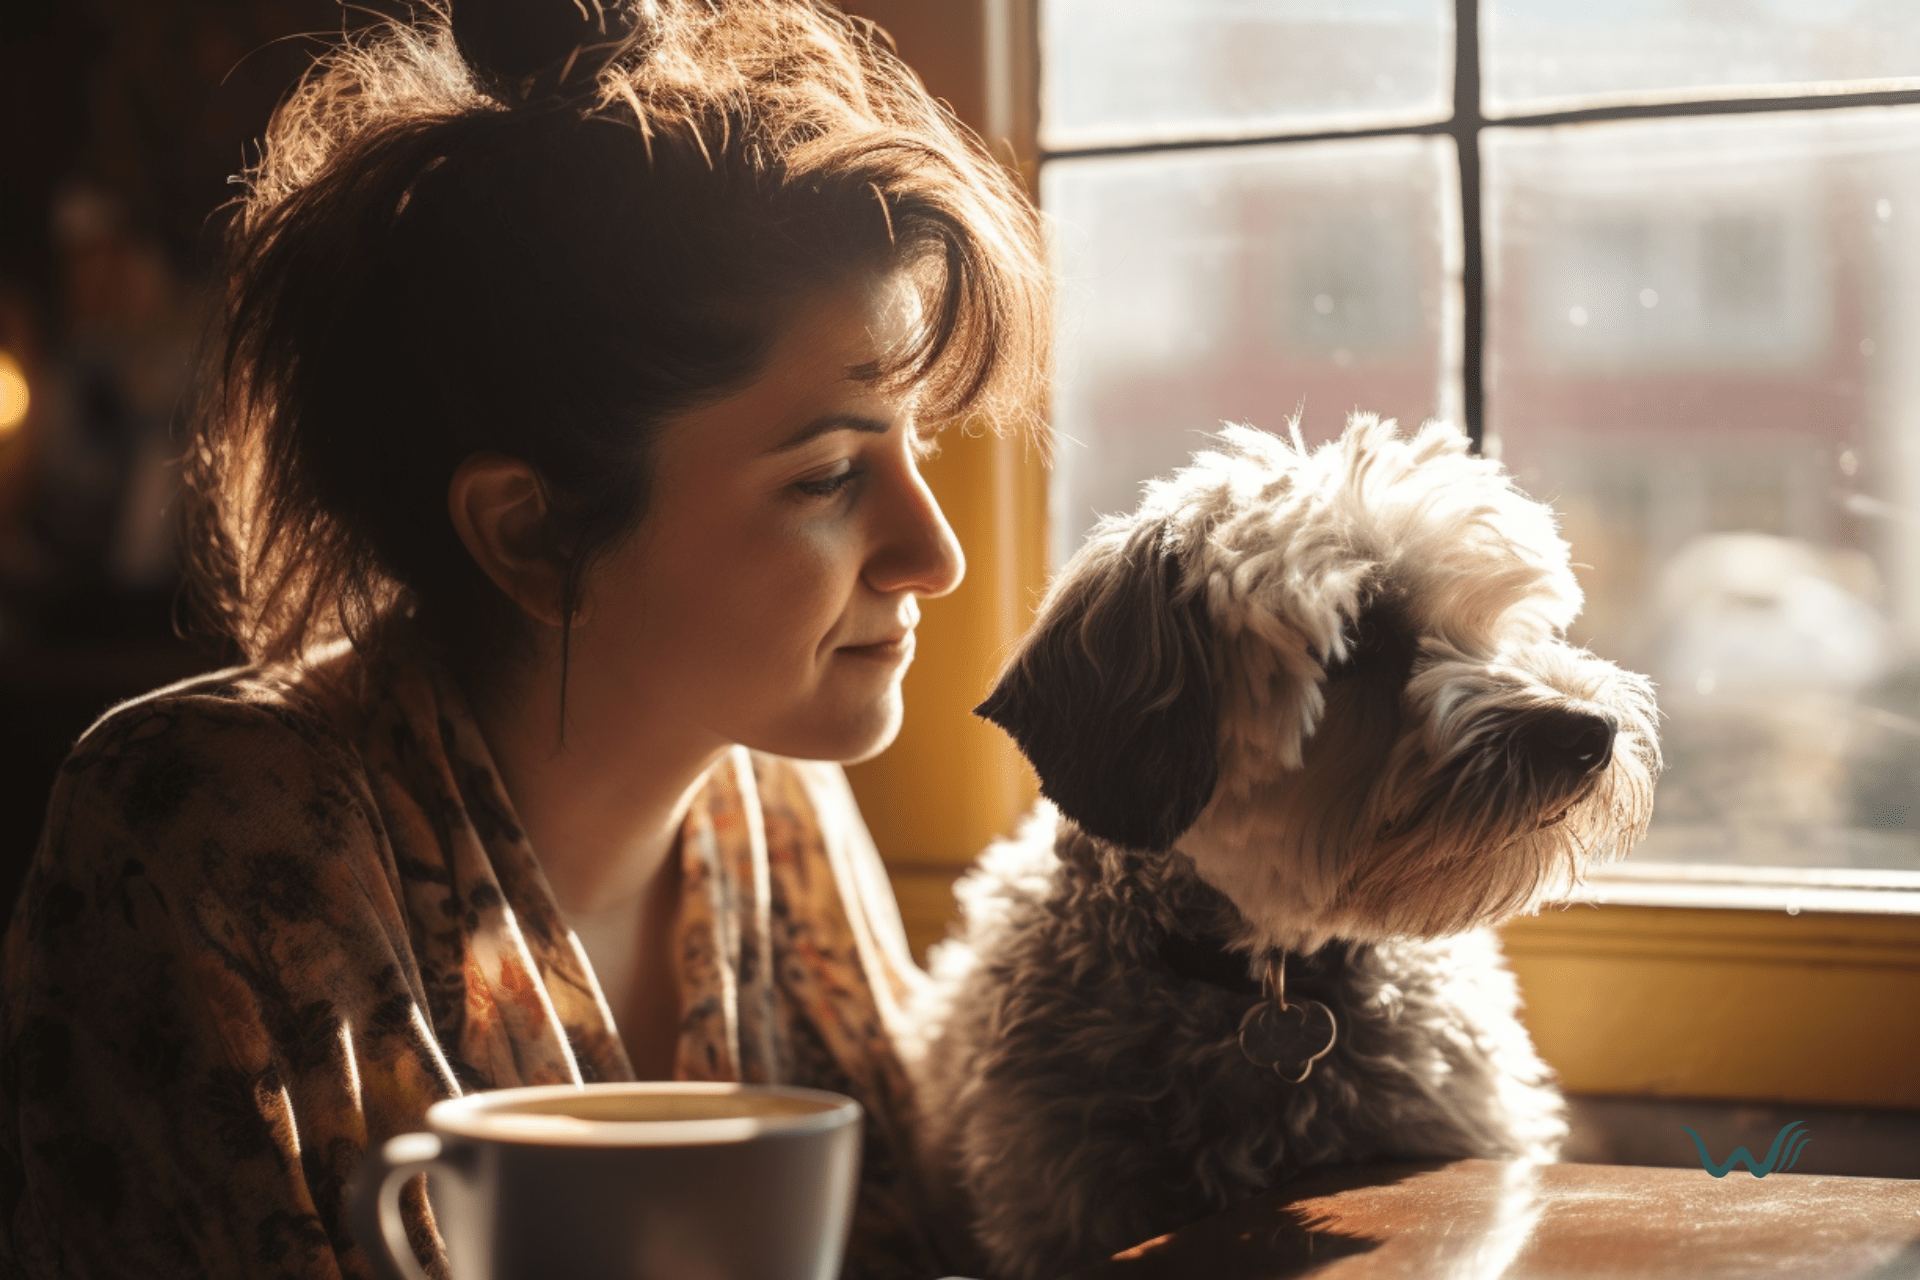 3 best practices for emotional support animals in public places